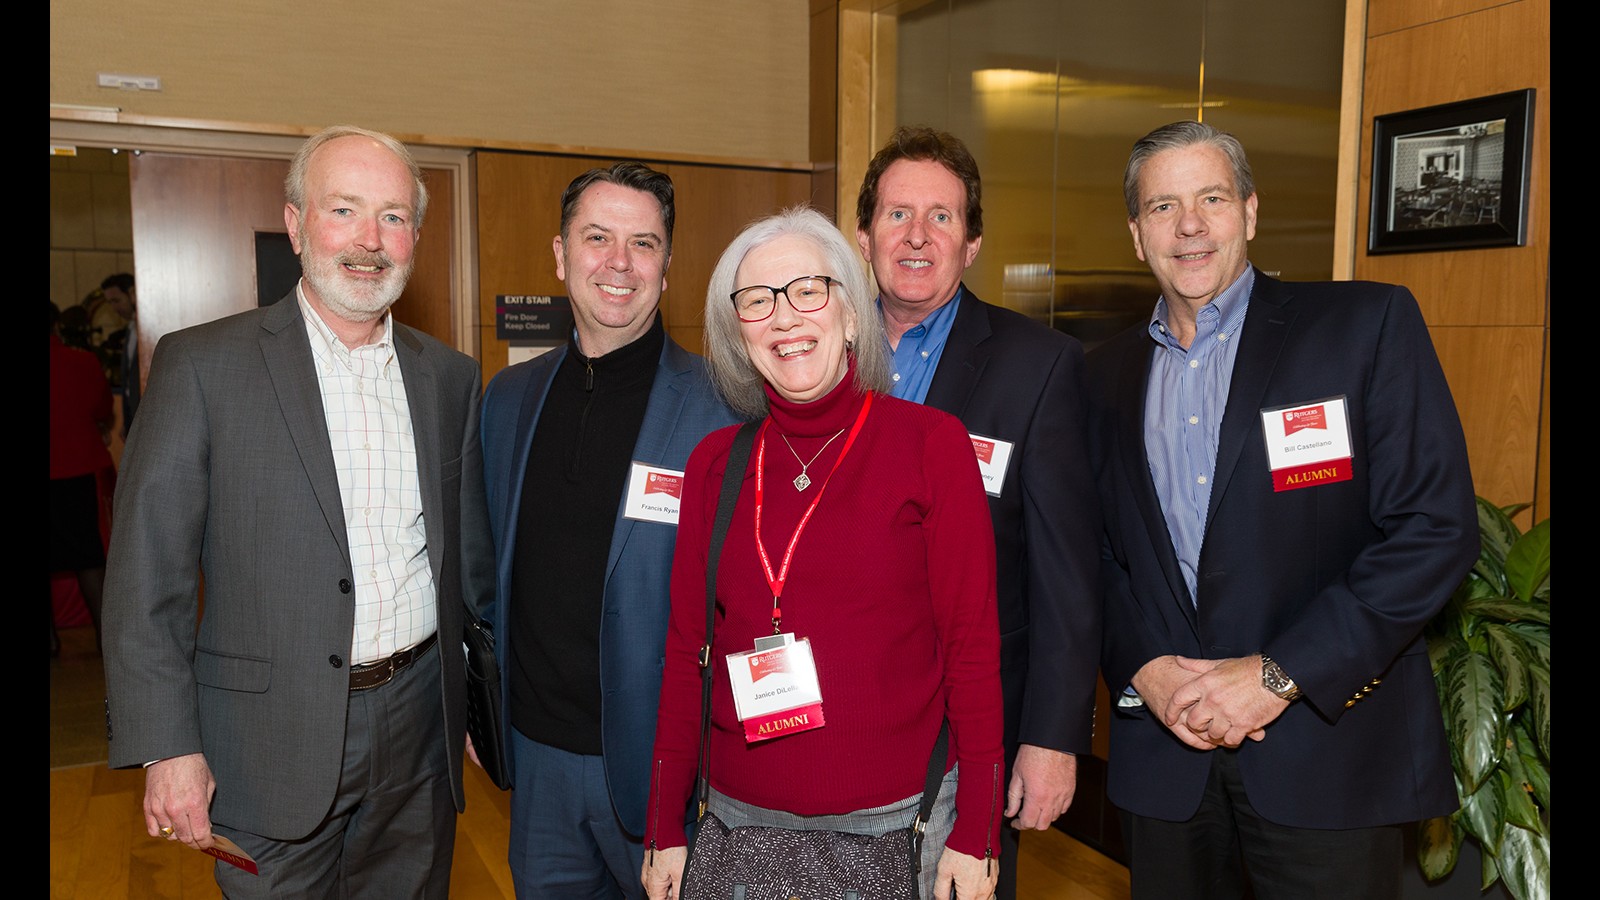 photo from SMLR's 25th Anniversary Celebration - March 2020